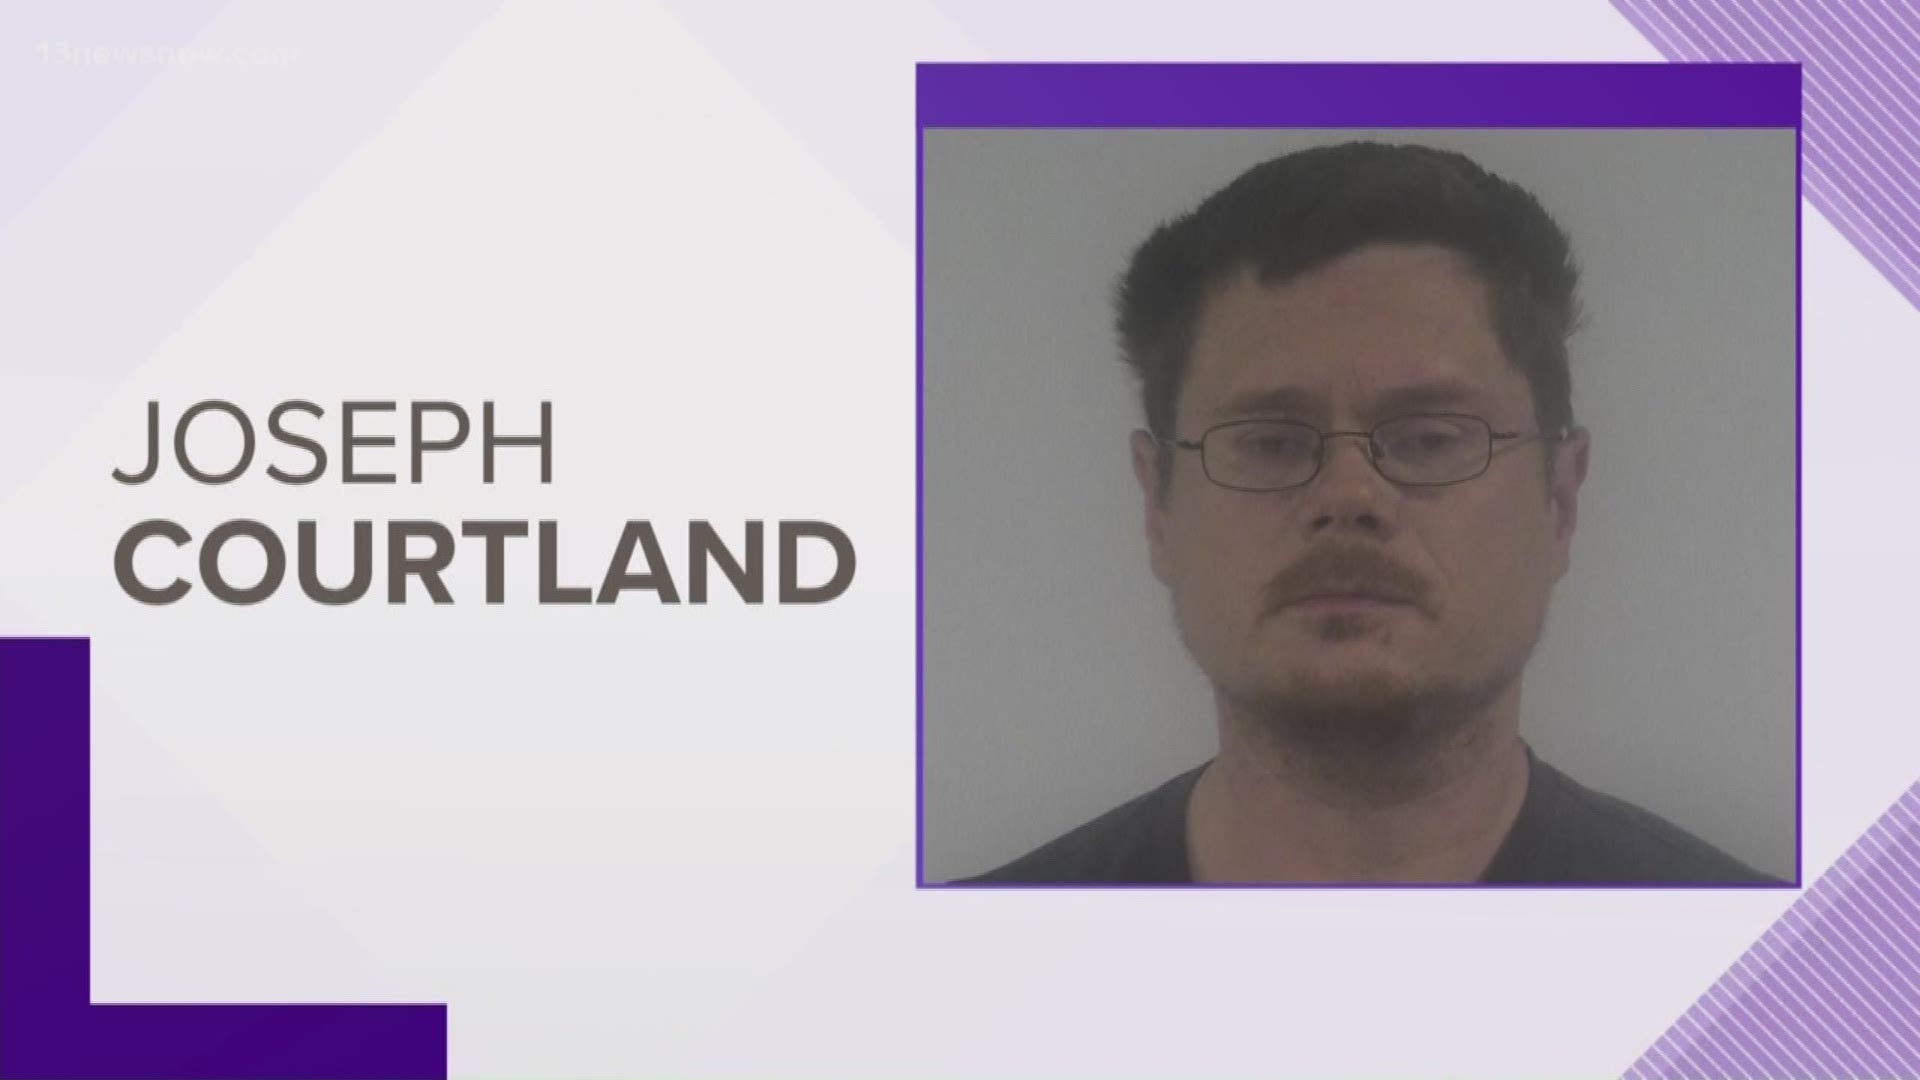 Joseph Courtland hit a VDOT worker on an I-264 exit ramp so state police took his phone to see if he was using it. They found child porn sites in his search history.